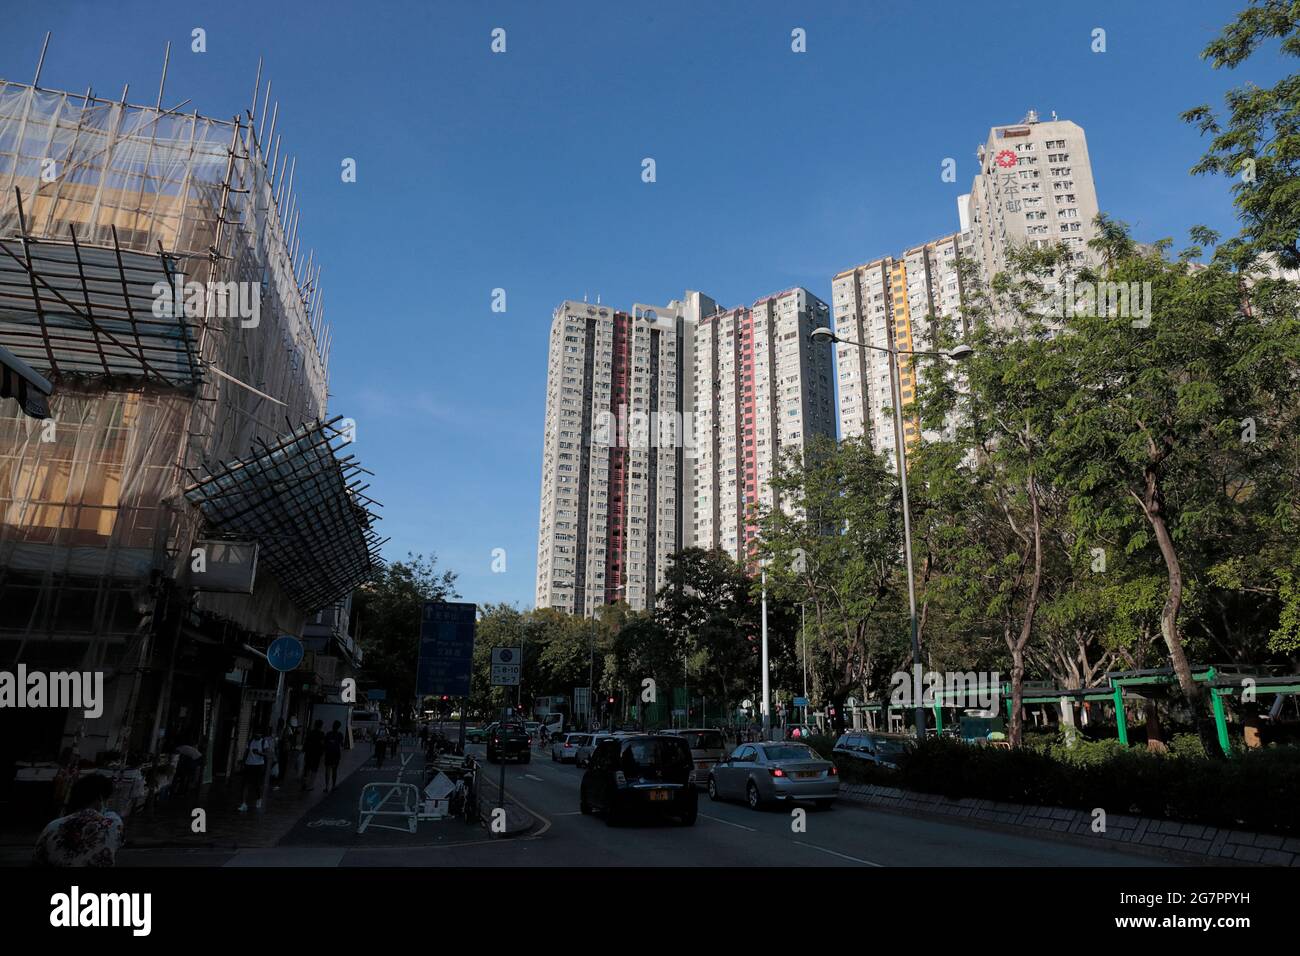 Tower blocks of Tin Ping (Public Housing) Estate, viewed from Lung Sum Avenue, Sheung Shui, late afternoon, New Territories, Hong Kong 15th July 2021 Stock Photo